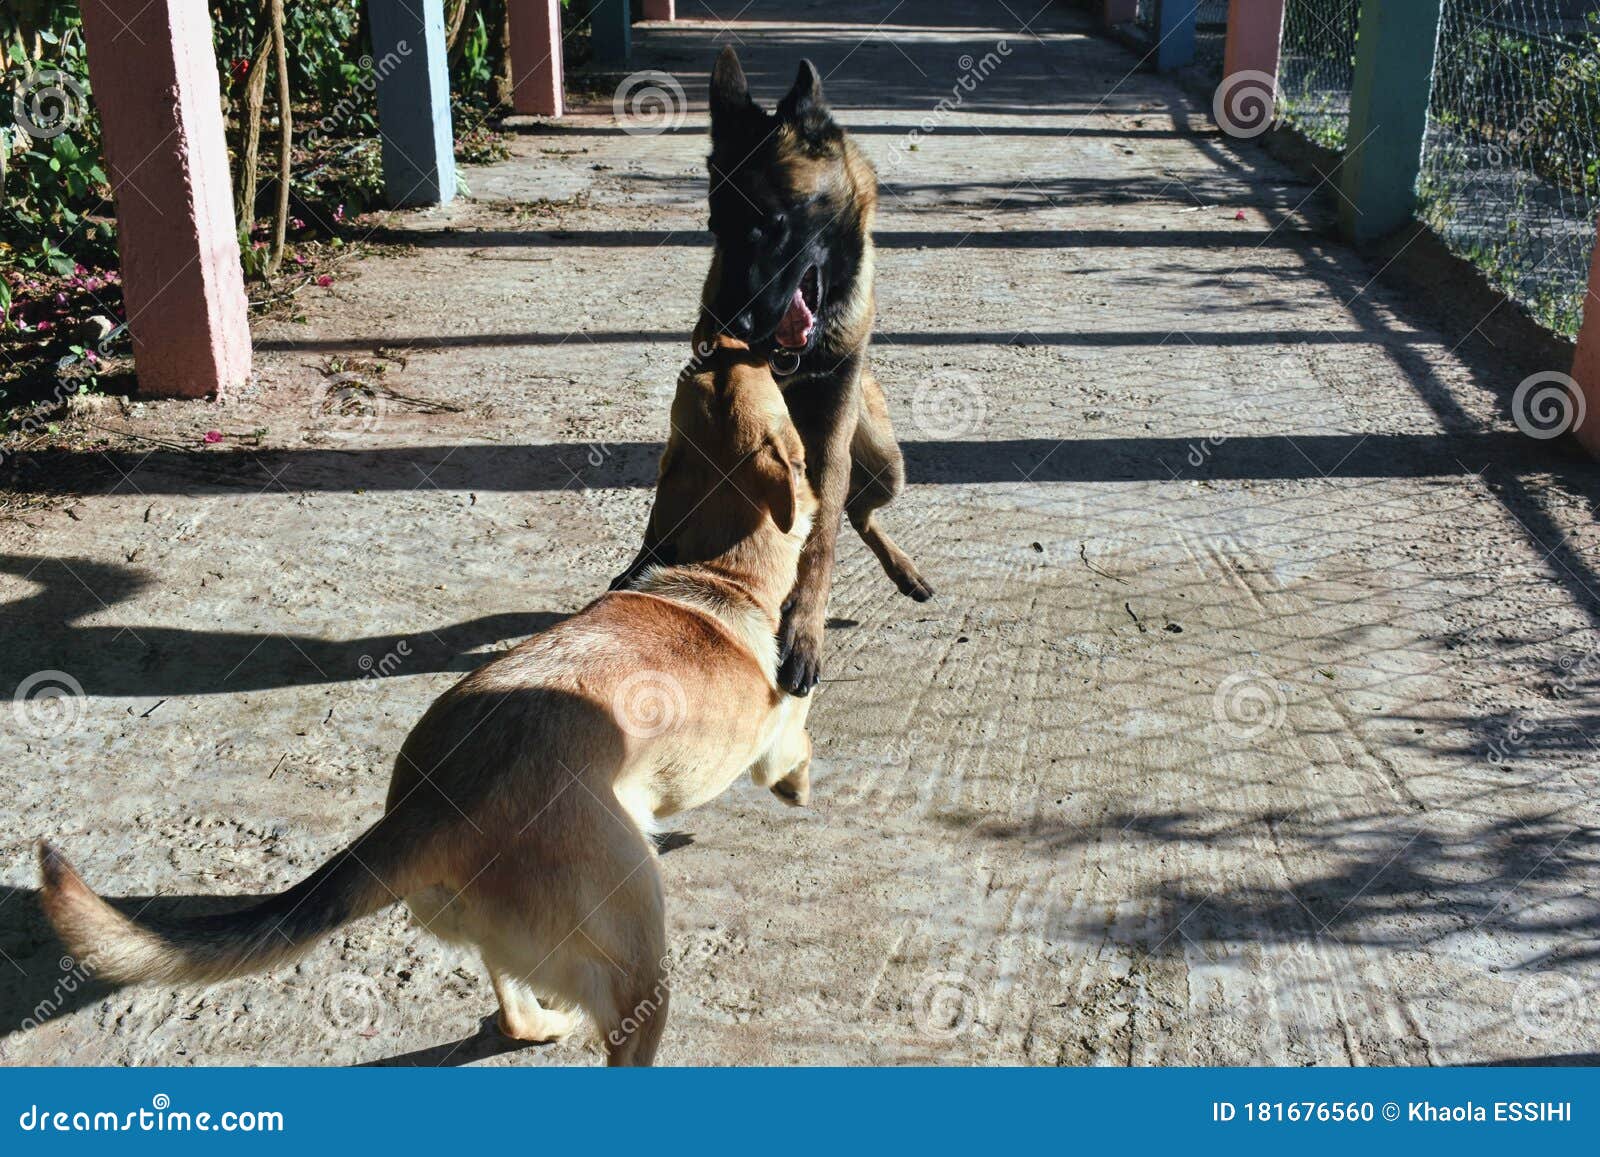 Two Beautiful Playing Dogs Malinois Race On A Sunny Day In The Garden Fluffy Light And Dark Brown And Black Fur Stock Photo Image Of Dogs Mammal 181676560